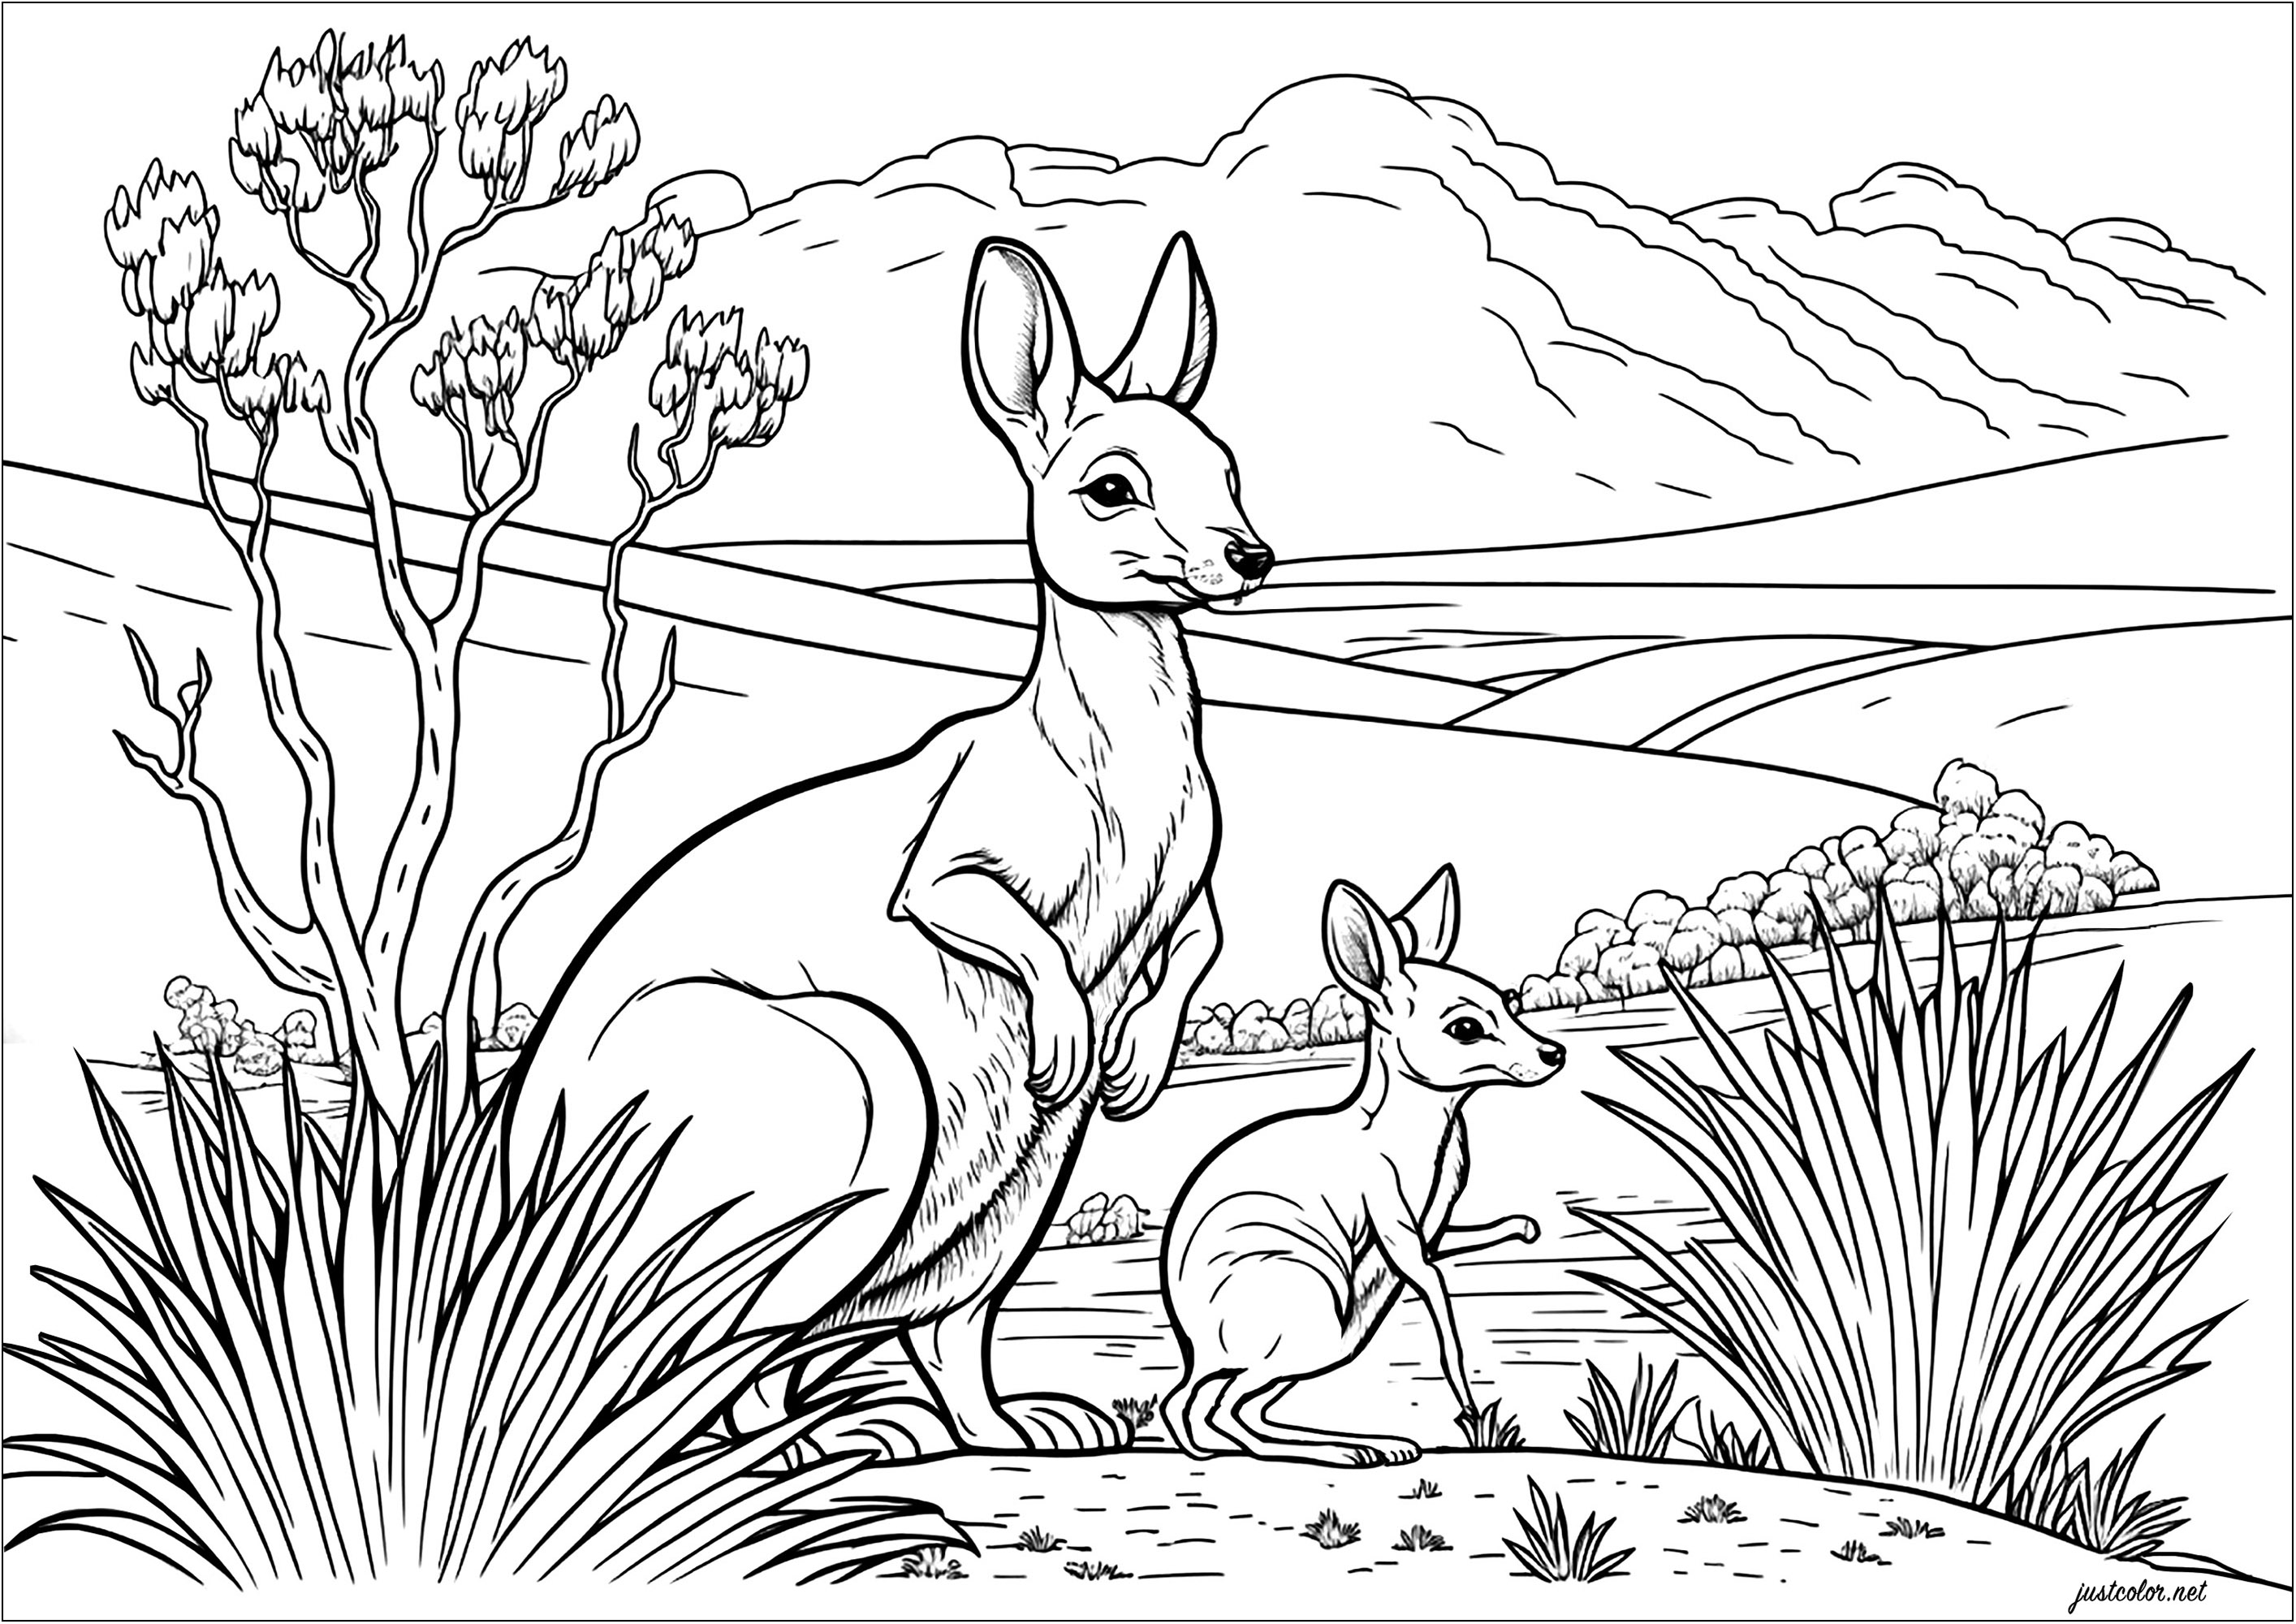 Color this mother kangaroo and her cub. Explore the Australian desert landscape with cacti and sunny skies, using your imagination to bring this scene to life. Let your creativity run wild with color, and join the hopping adventure of these two kangaroos.